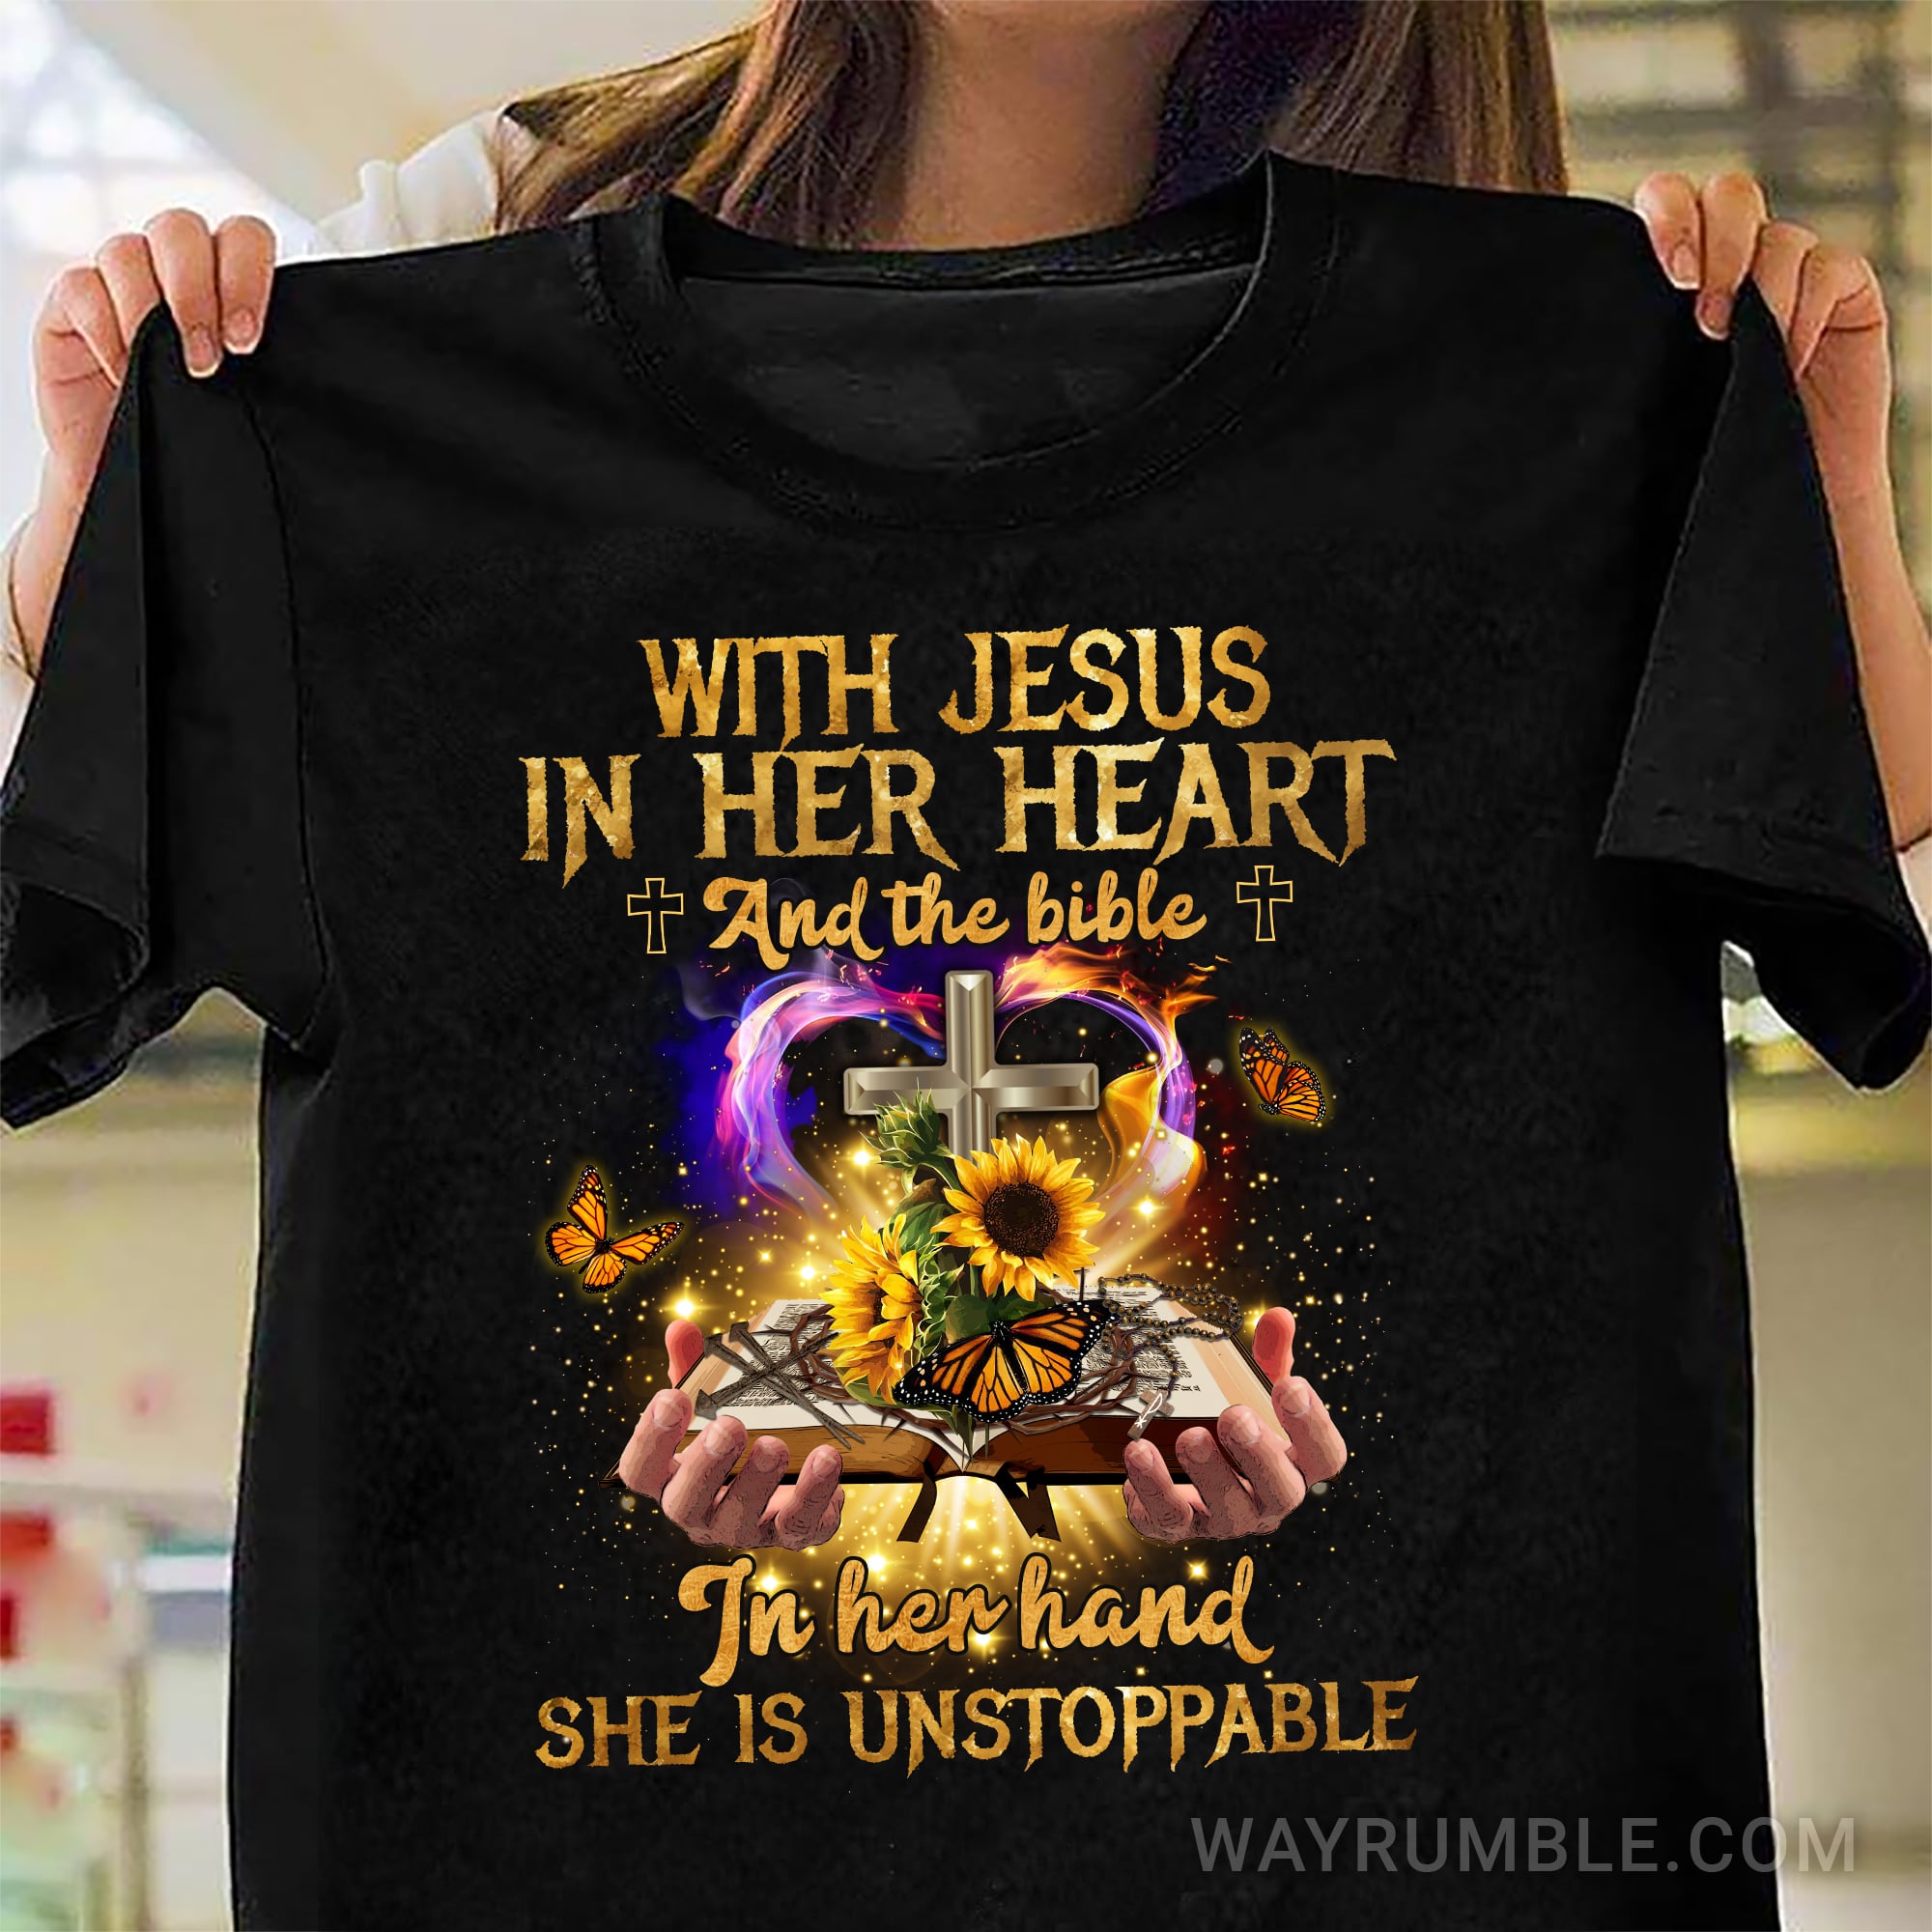 With Jesus in her heart, She is unstoppable – Jesus T Shirt